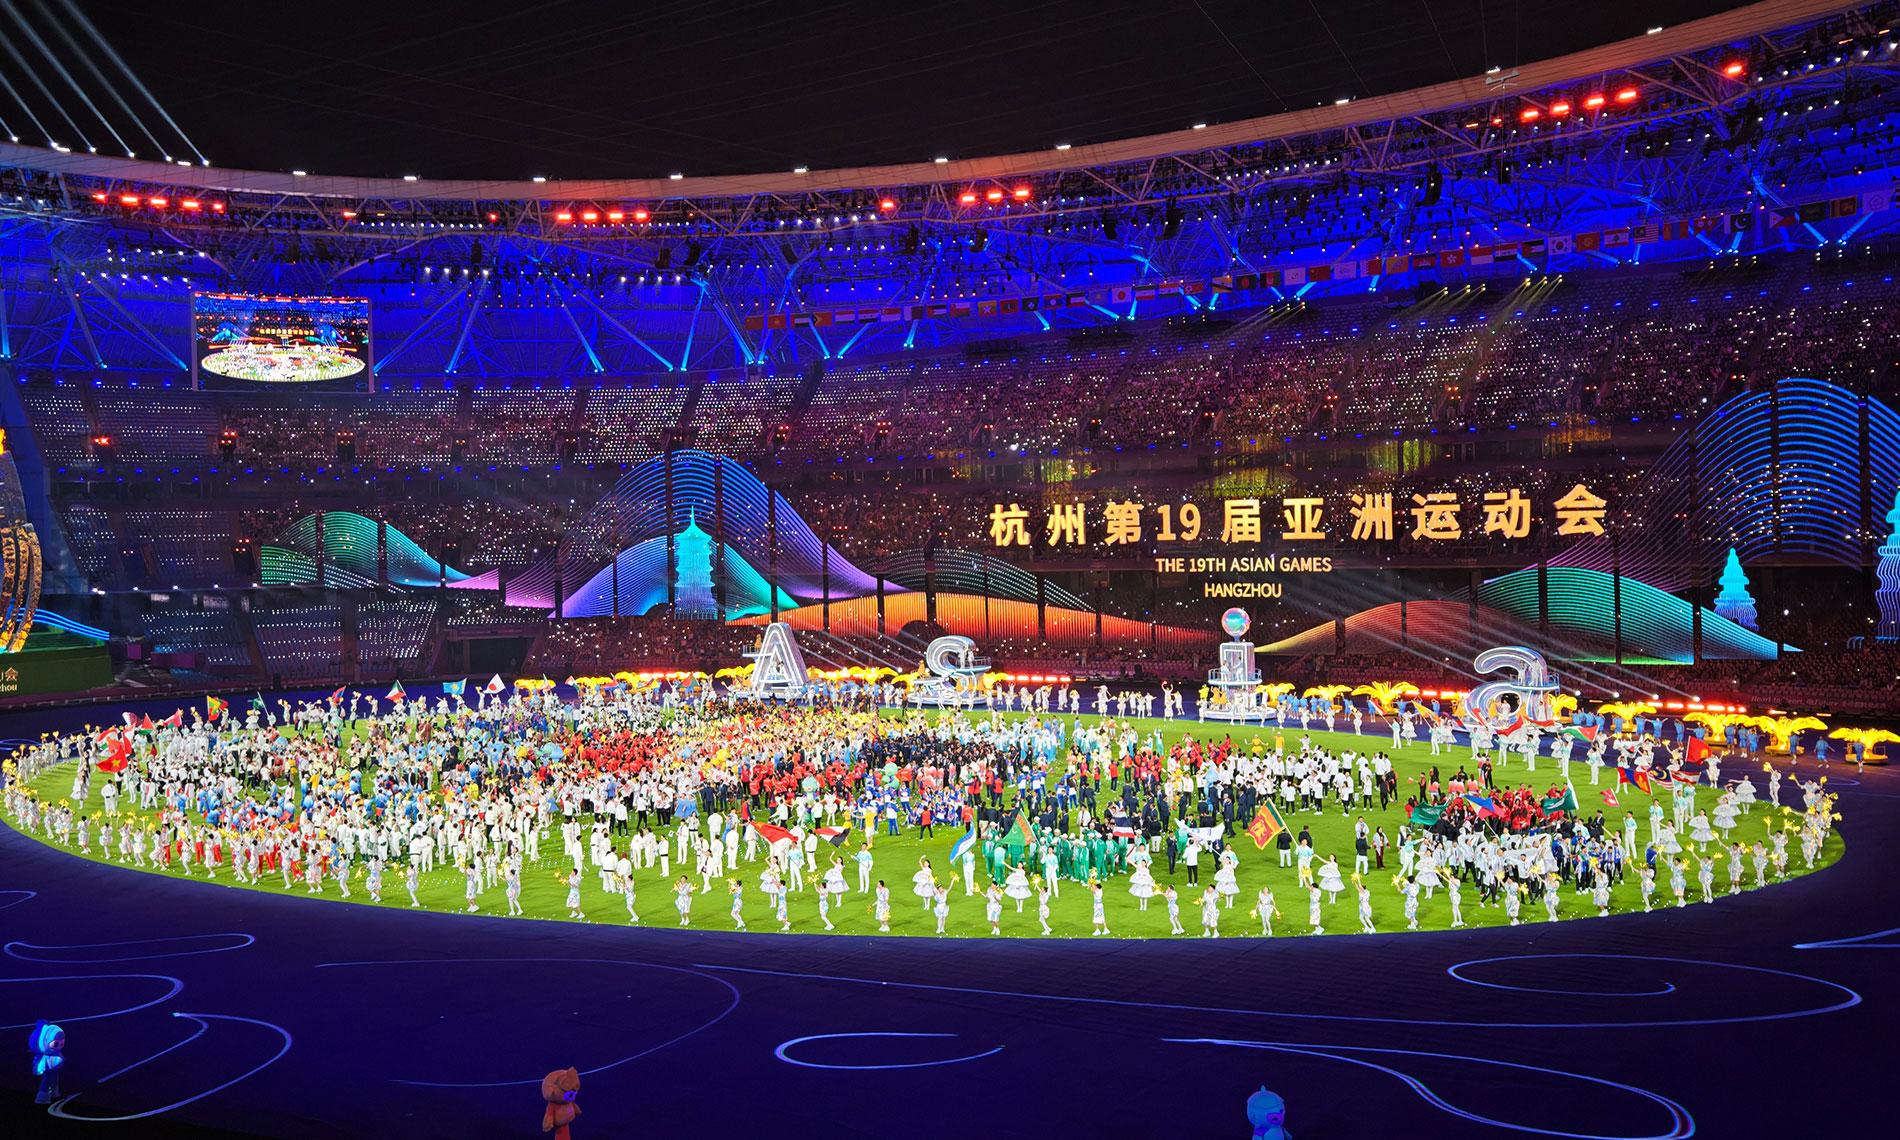 vivo and iQOO Shine at Top Sporting Gala as 19th Asian Games Concludes in Hangzhou